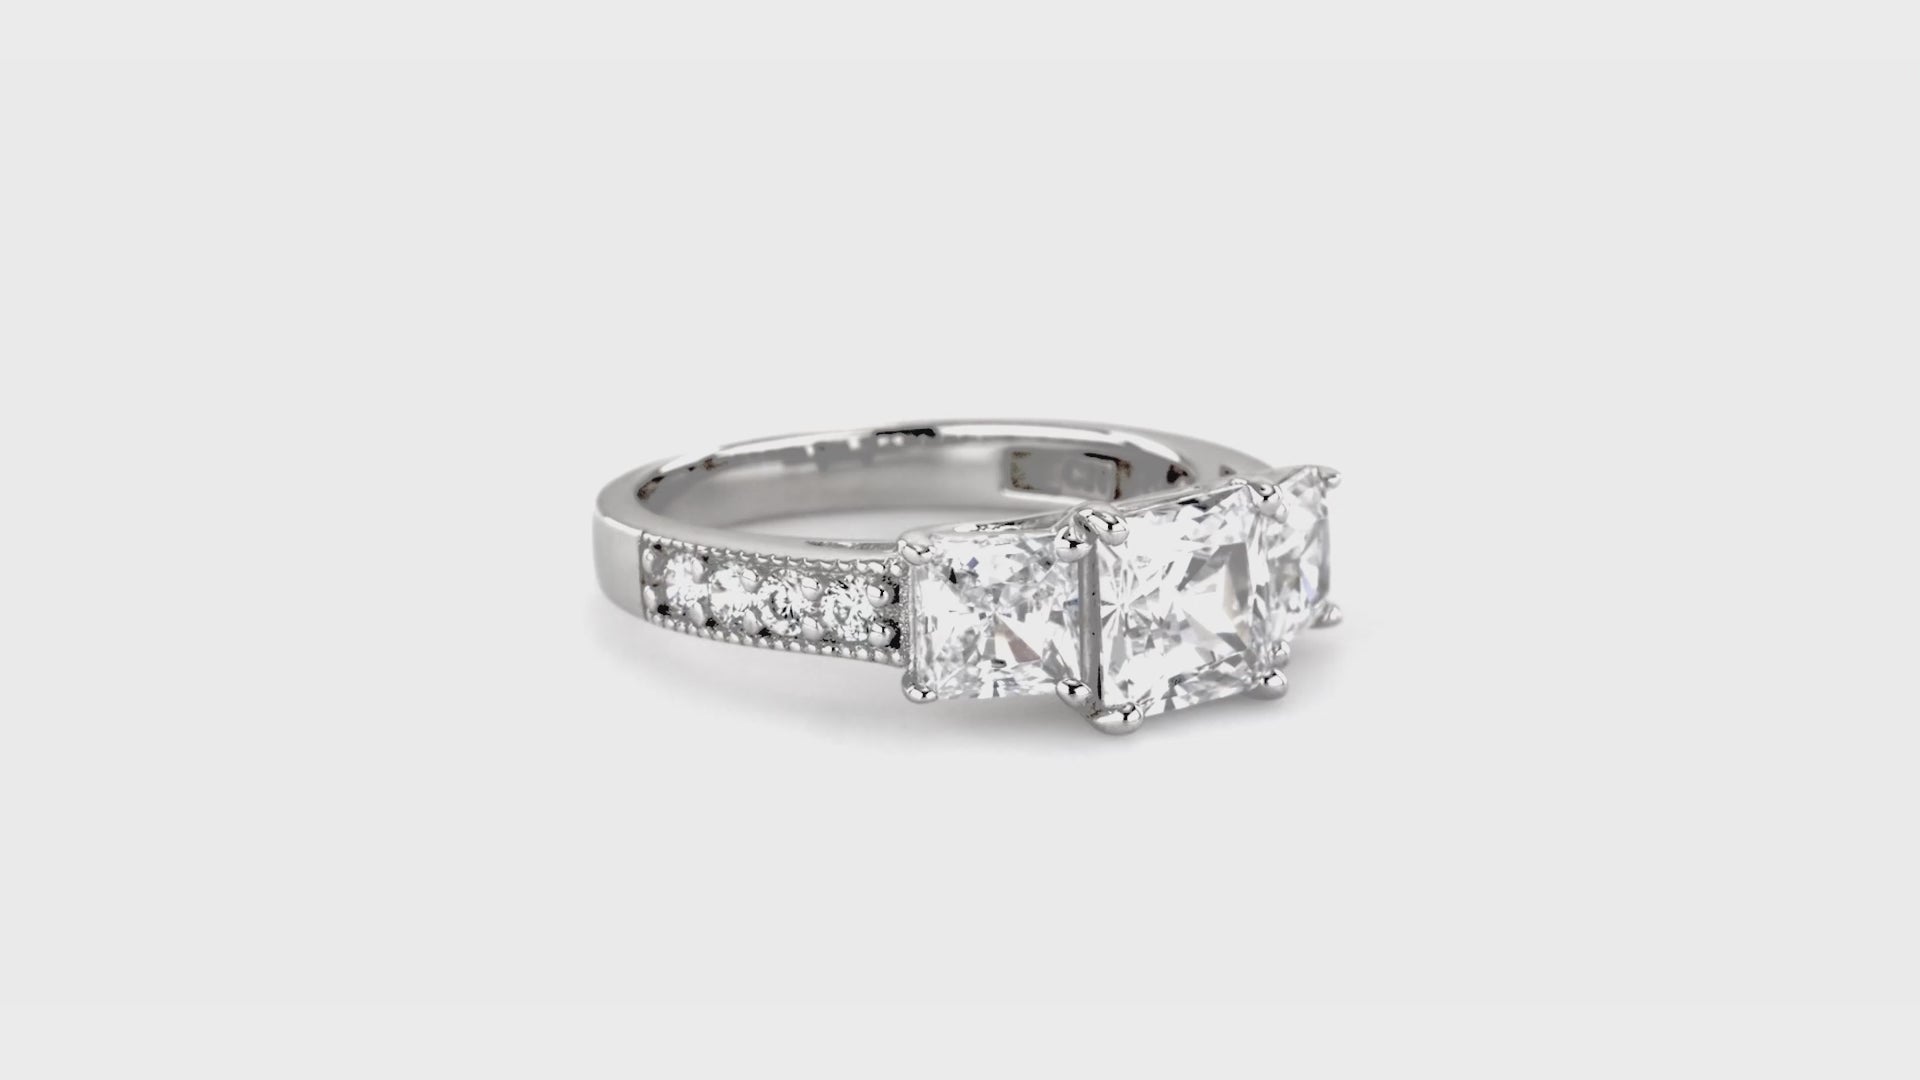 Video Contains 3-Stone Princess CZ Ring Set in Sterling Silver. Style Number R776-02